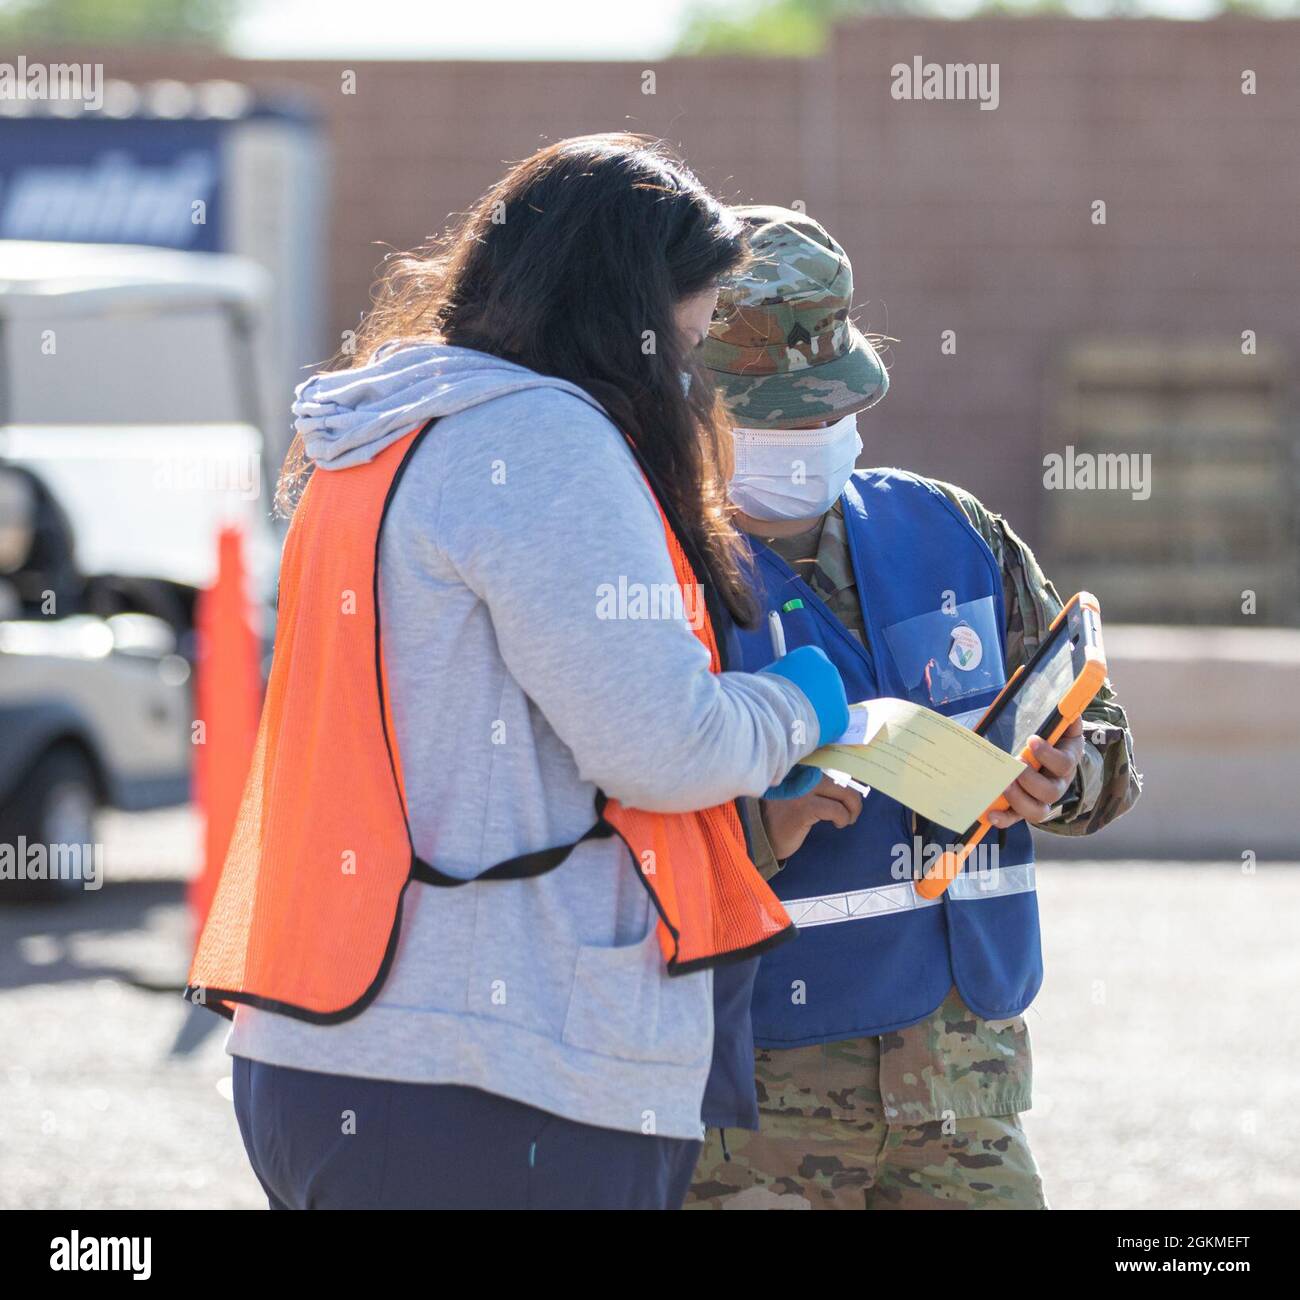 Ammy Phoenix, left, a civilian registered nurse, and U.S. Army Sgt. Maggie Van Wagenen, right, a combat medic assigned to 2nd Stryker Brigade Combat Team, 4th Infantry Division, work together in Pueblo, Colorado, May 27, 2021. The Soldiers continue to vaccinate members of the Pueblo community and surrounding areas as part of the federal vaccination response mission. U.S. Northern Command, through U.S. Army North, remains committed to providing continued, flexible Department of Defense support to the Federal Emergency Management Agency as part of the whole-of-government response to COVID-19. Stock Photo